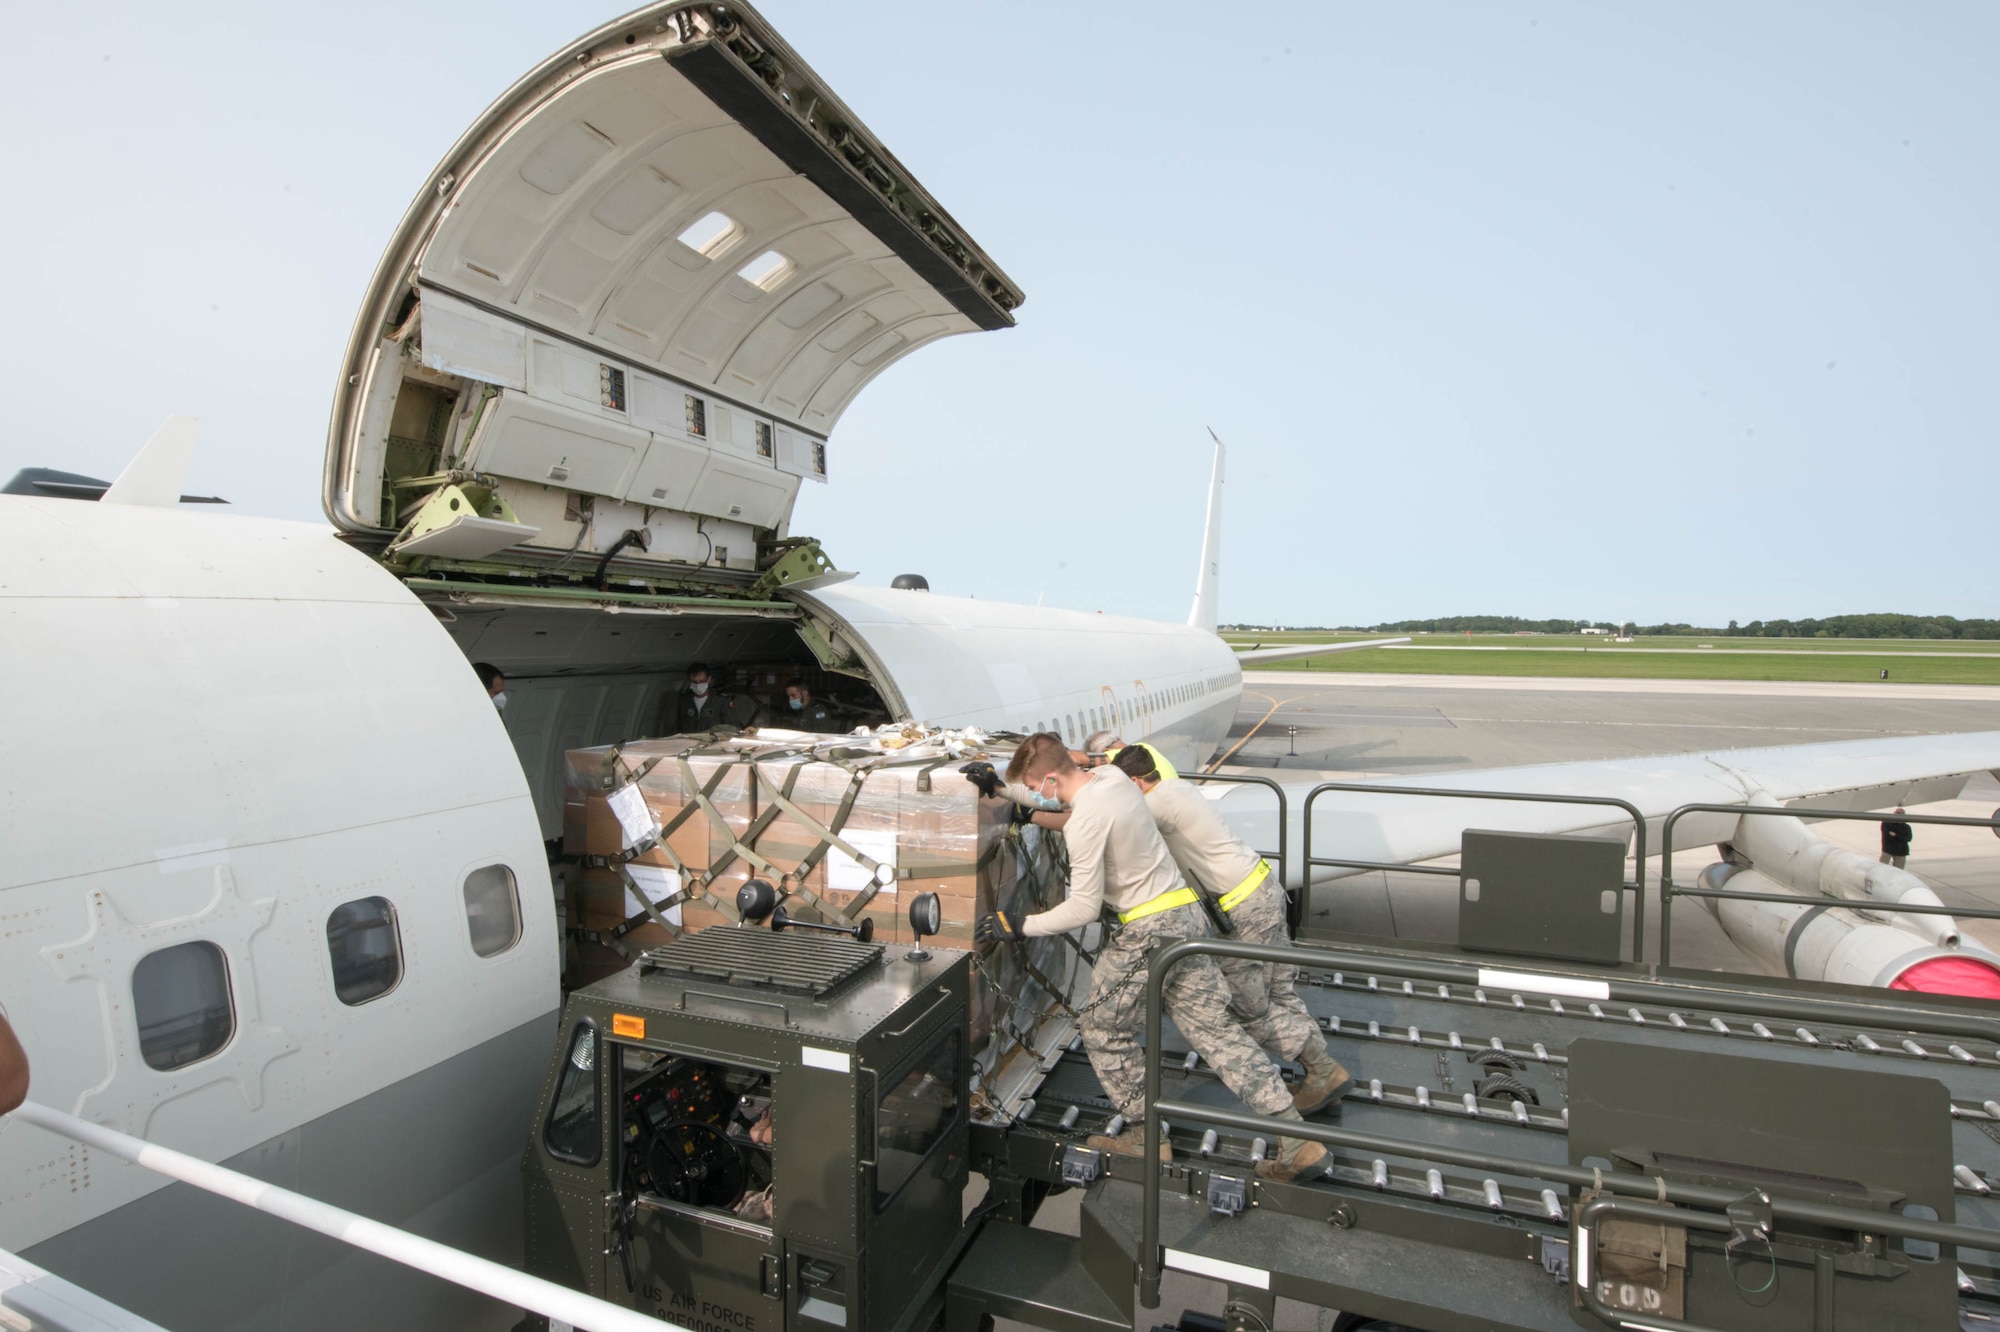 A load team from the 436th Aerial Port Squadron loads a pallet of equipment onto an Israeli air force Boeing 707 Sept. 15, 2020, at Dover Air Force Base, Delaware, as part of a foreign military sales operation. Over the past 70 years, the U.S. and Israel have developed unbreakable bonds through cooperation in security, economics and business, scientific research and innovation and people-to-people exchanges. Due to its strategic location, Dover AFB regularly supports foreign military sales operations. (U.S. Air Force photo by Mauricio Campino)